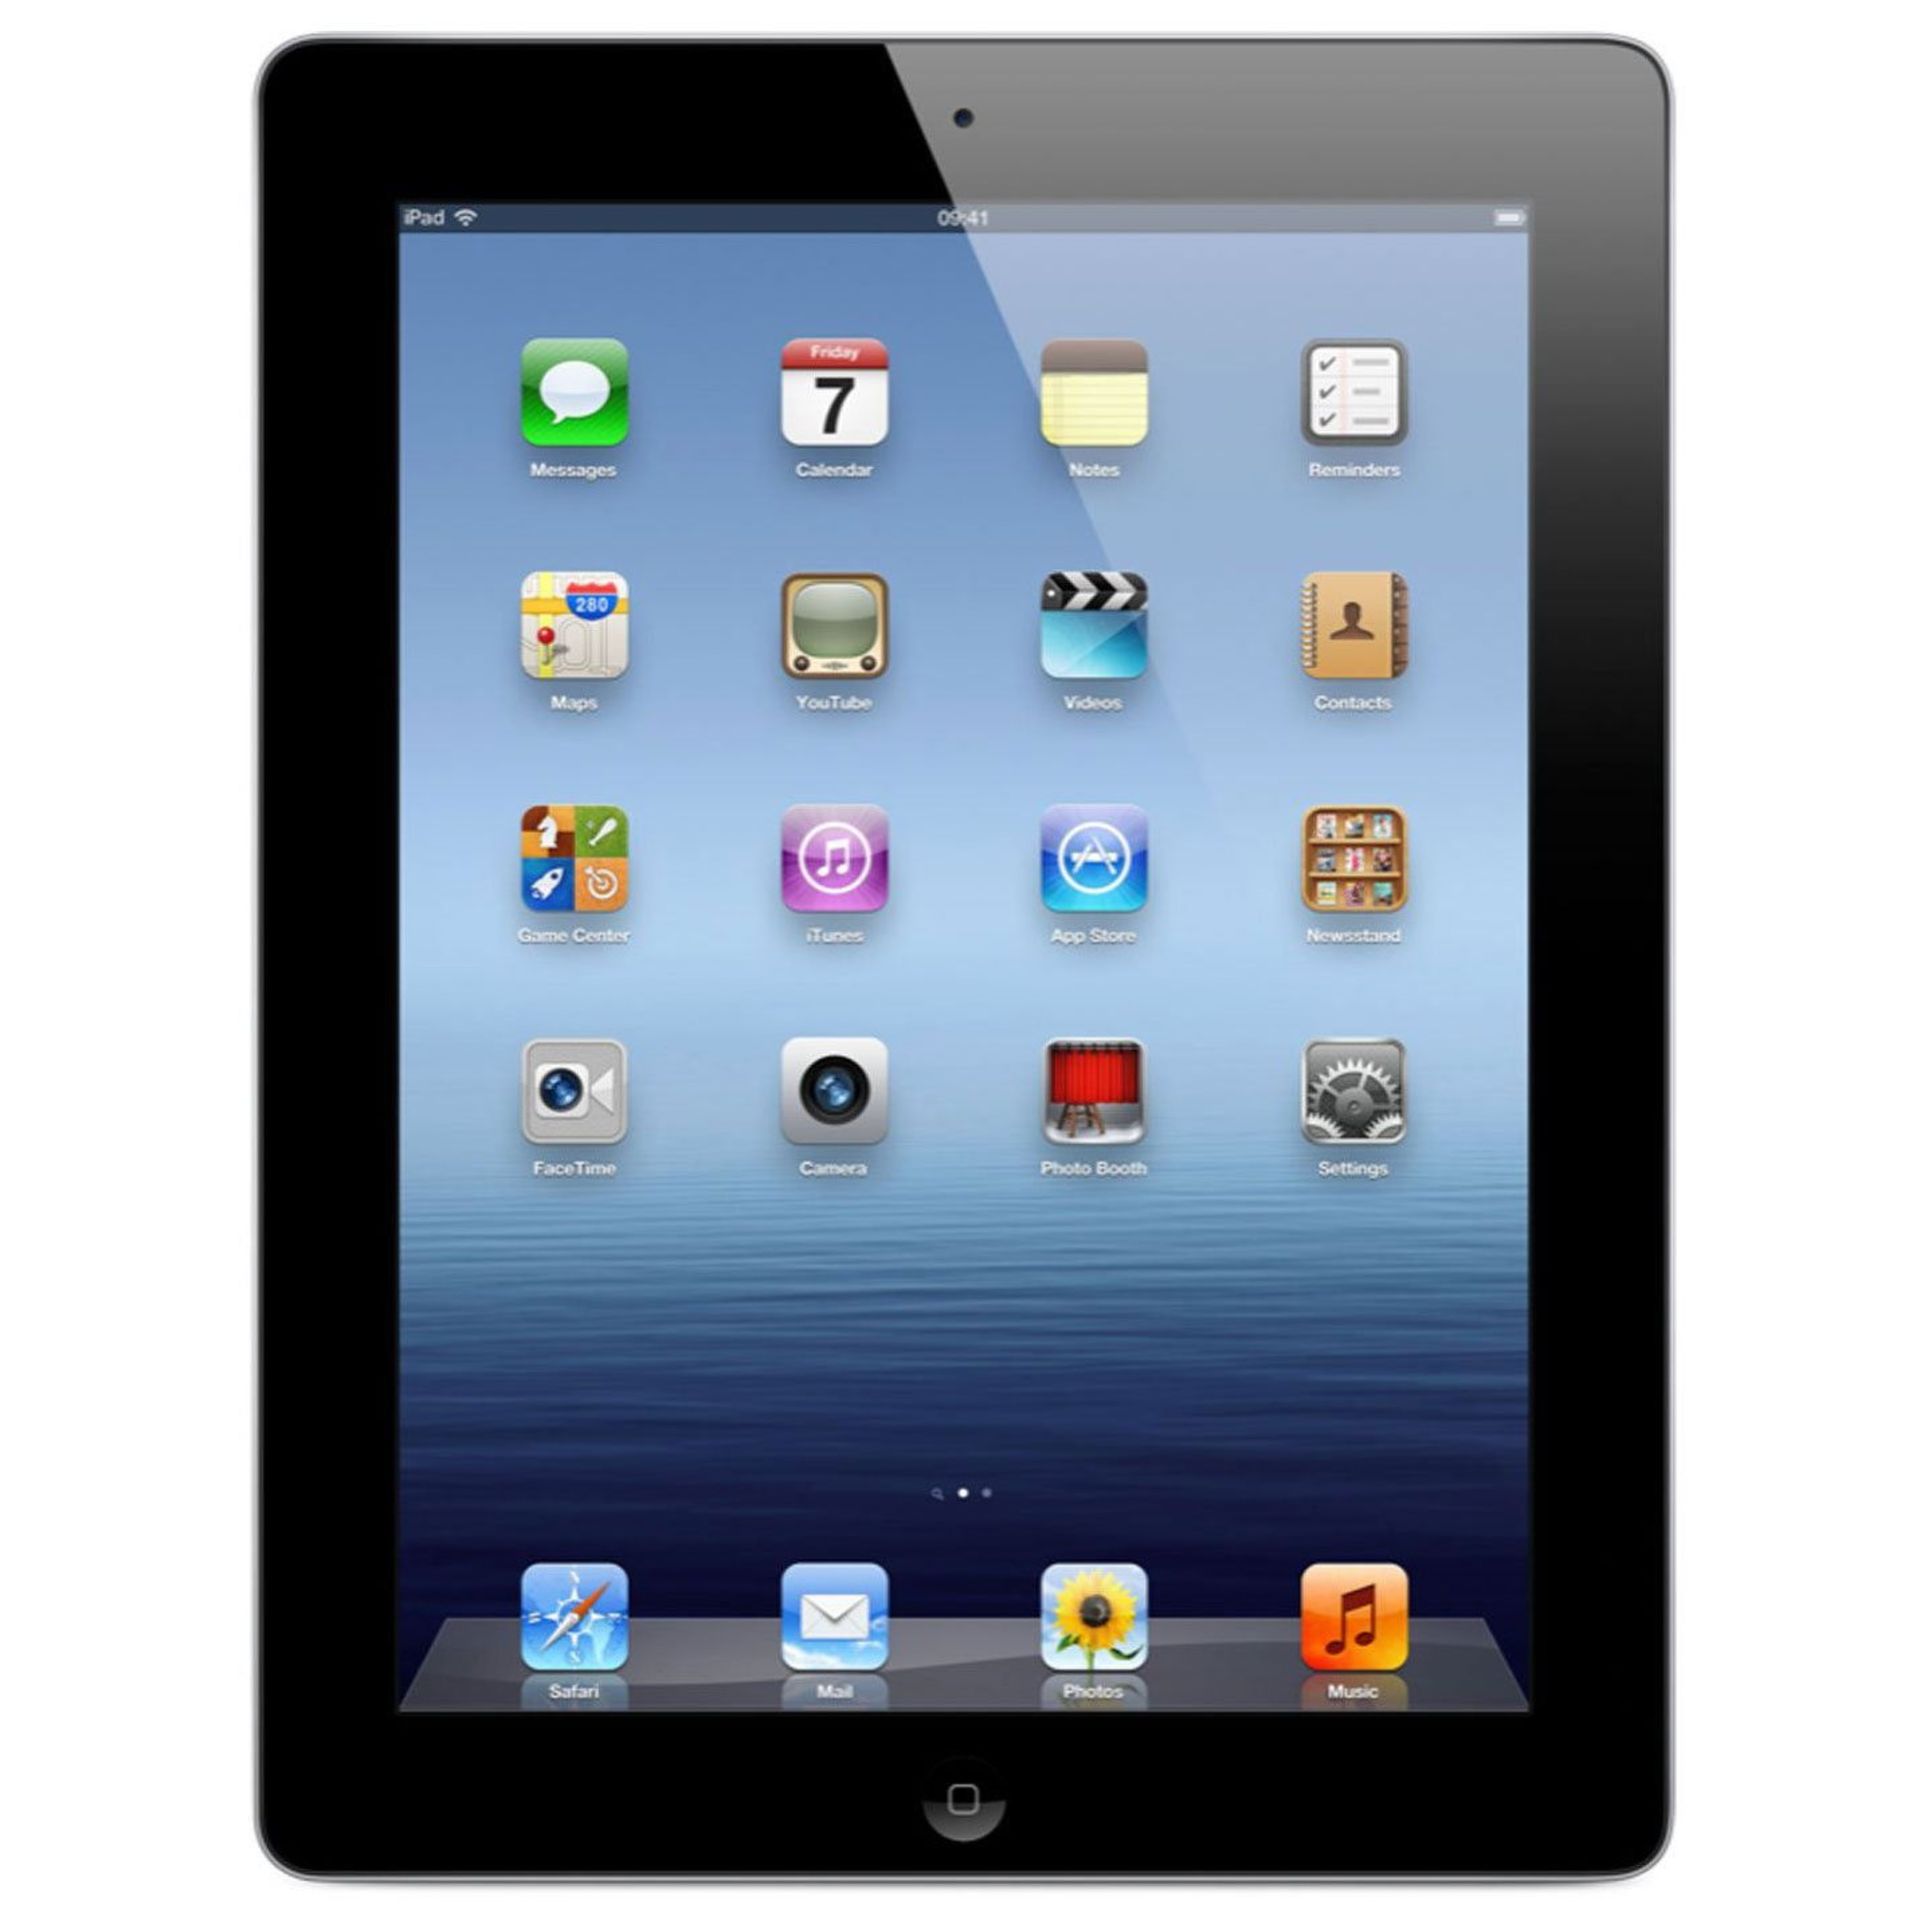 V Apple iPad 16Gb WiFi Silver Graded - May Have Minor Damage To screen Or Case generic Box With Lead